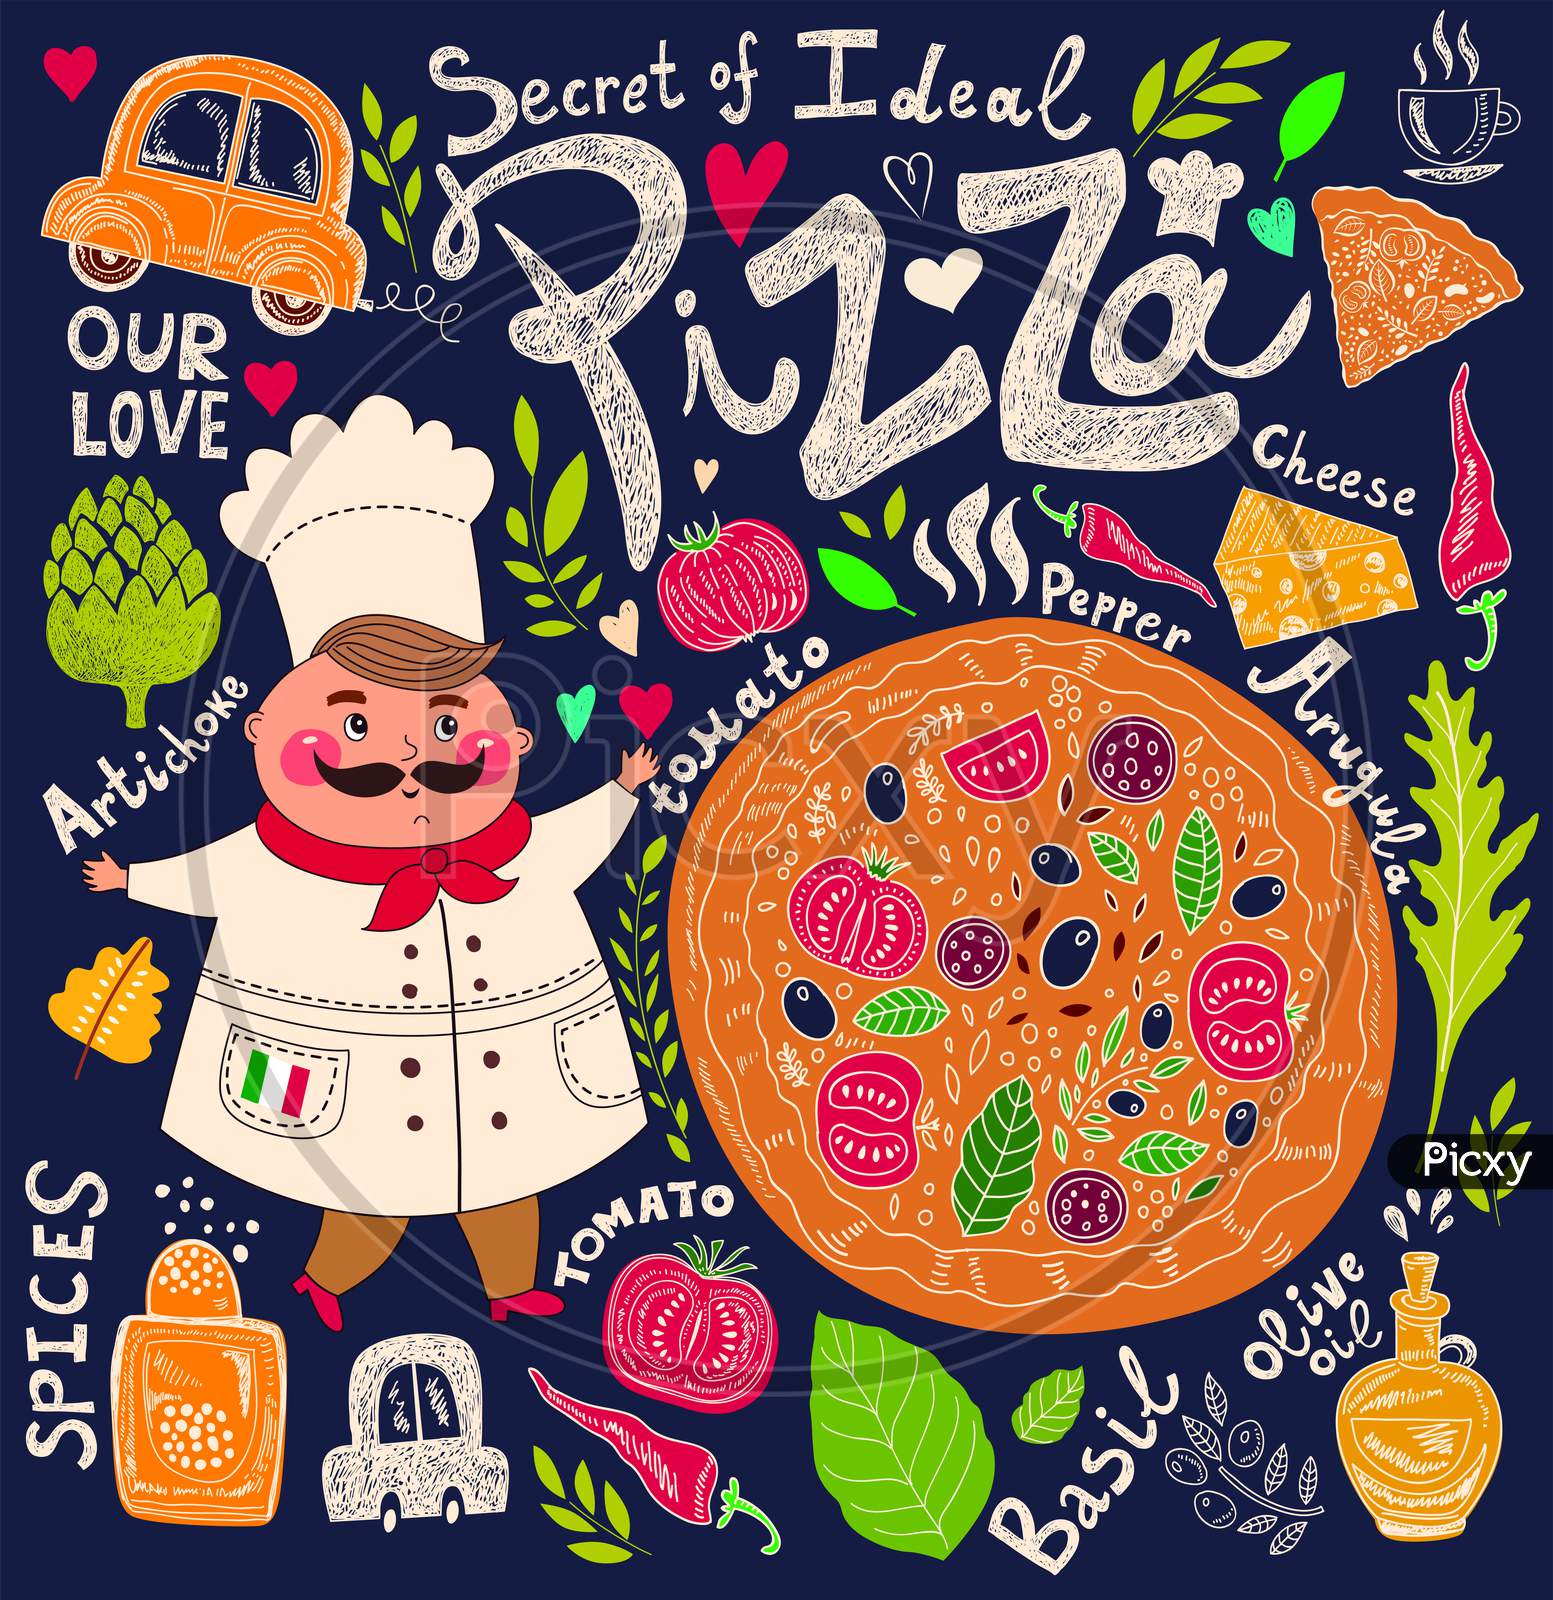 Pizza Item Text And Stuff With Background Illustration Wallpaper Design.